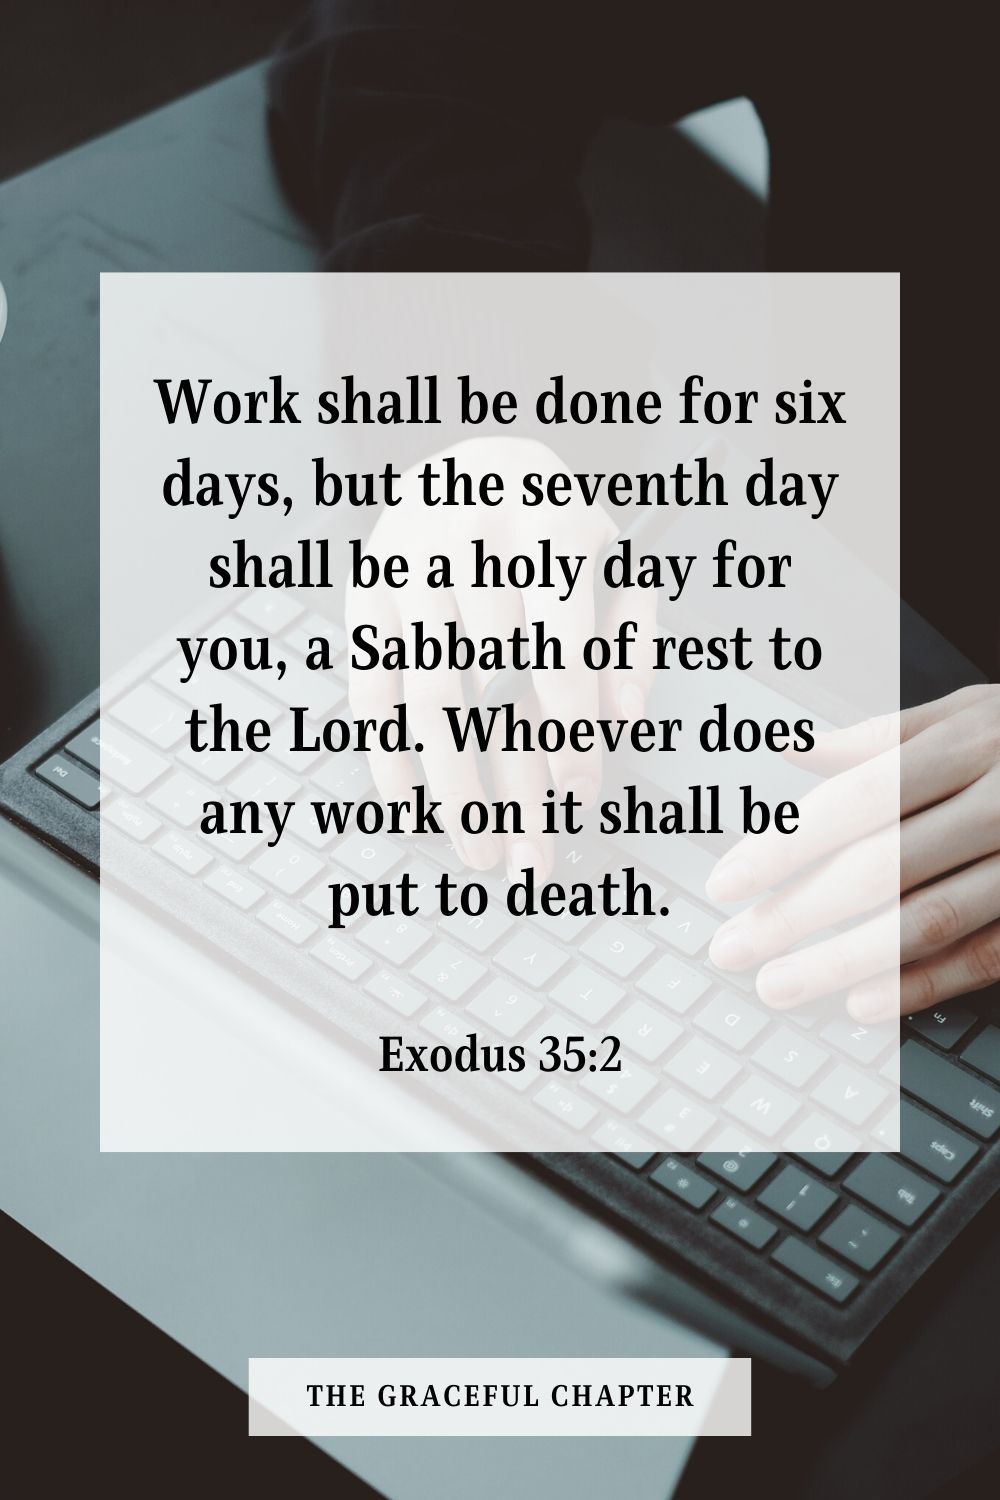 Work shall be done for six days, but the seventh day shall be a holy day for you, a Sabbath of rest to the Lord. Whoever does any work on it shall be put to death.